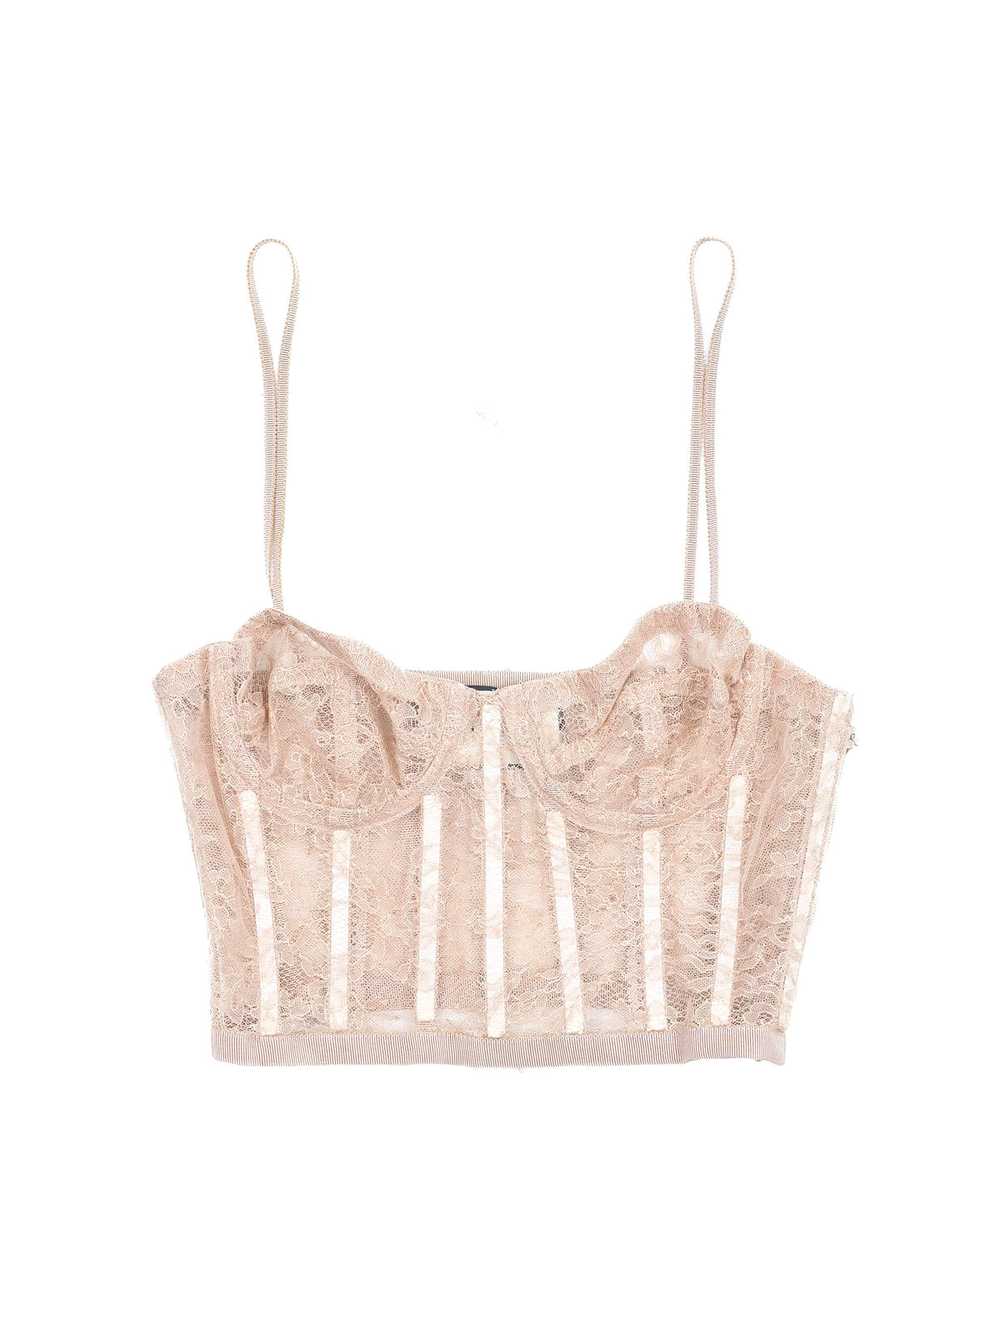 Gucci Nude Lace Bustier - image 1